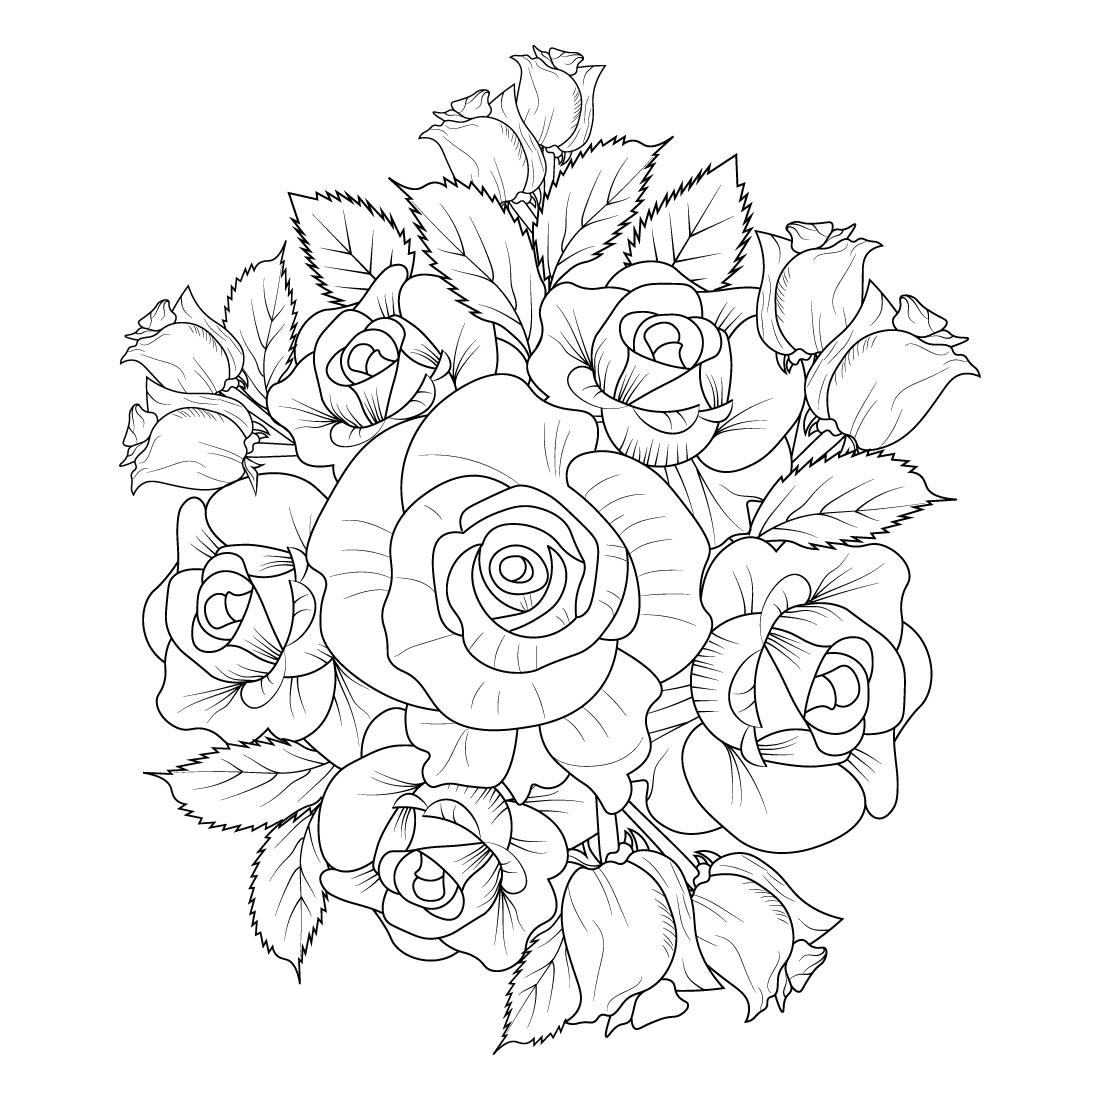 Rose Pencil Drawing Step By Step at ... | Roses drawing, Flower drawing, Flower  bouquet drawing